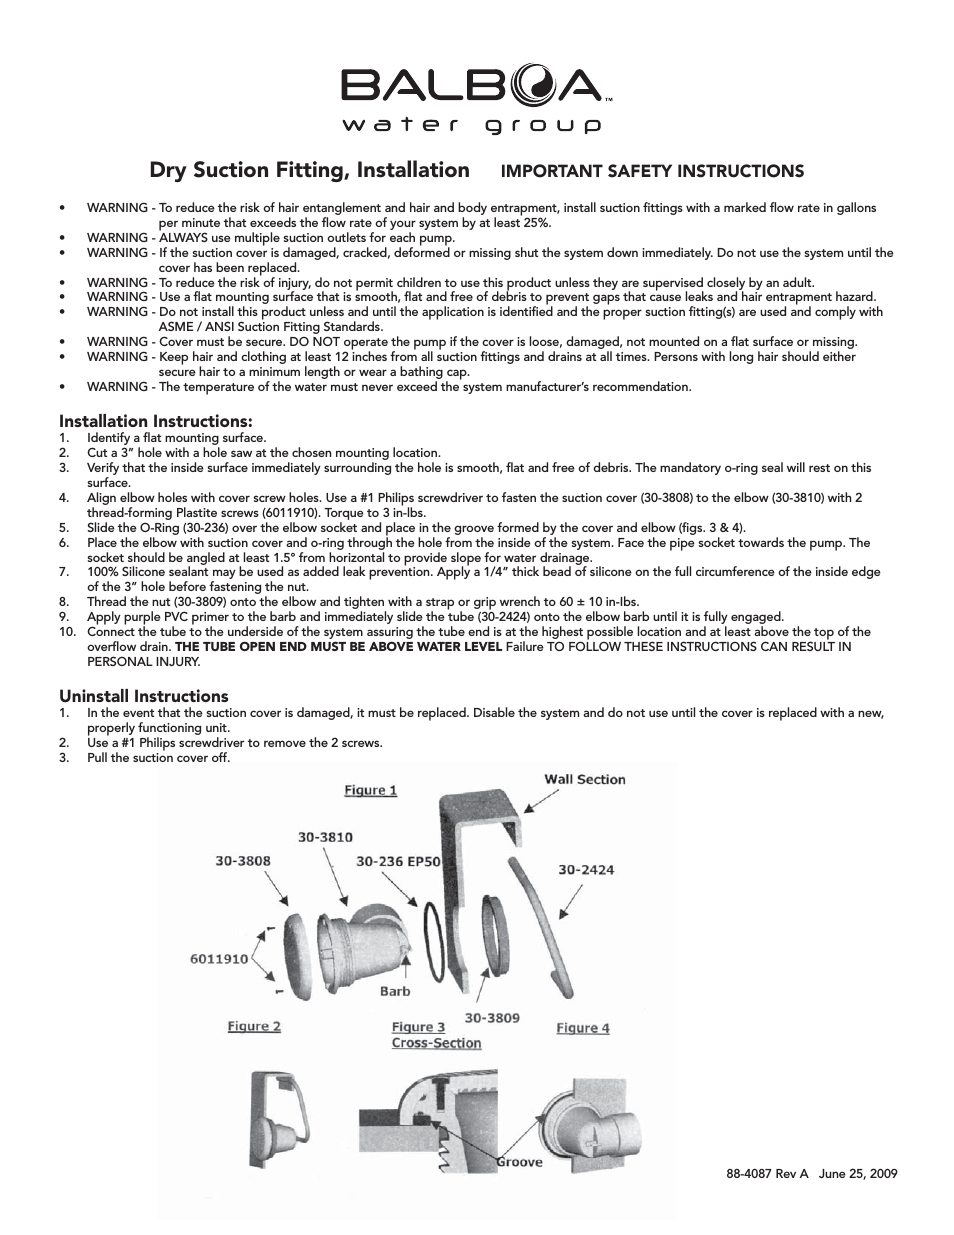 Dry Suction Fitting